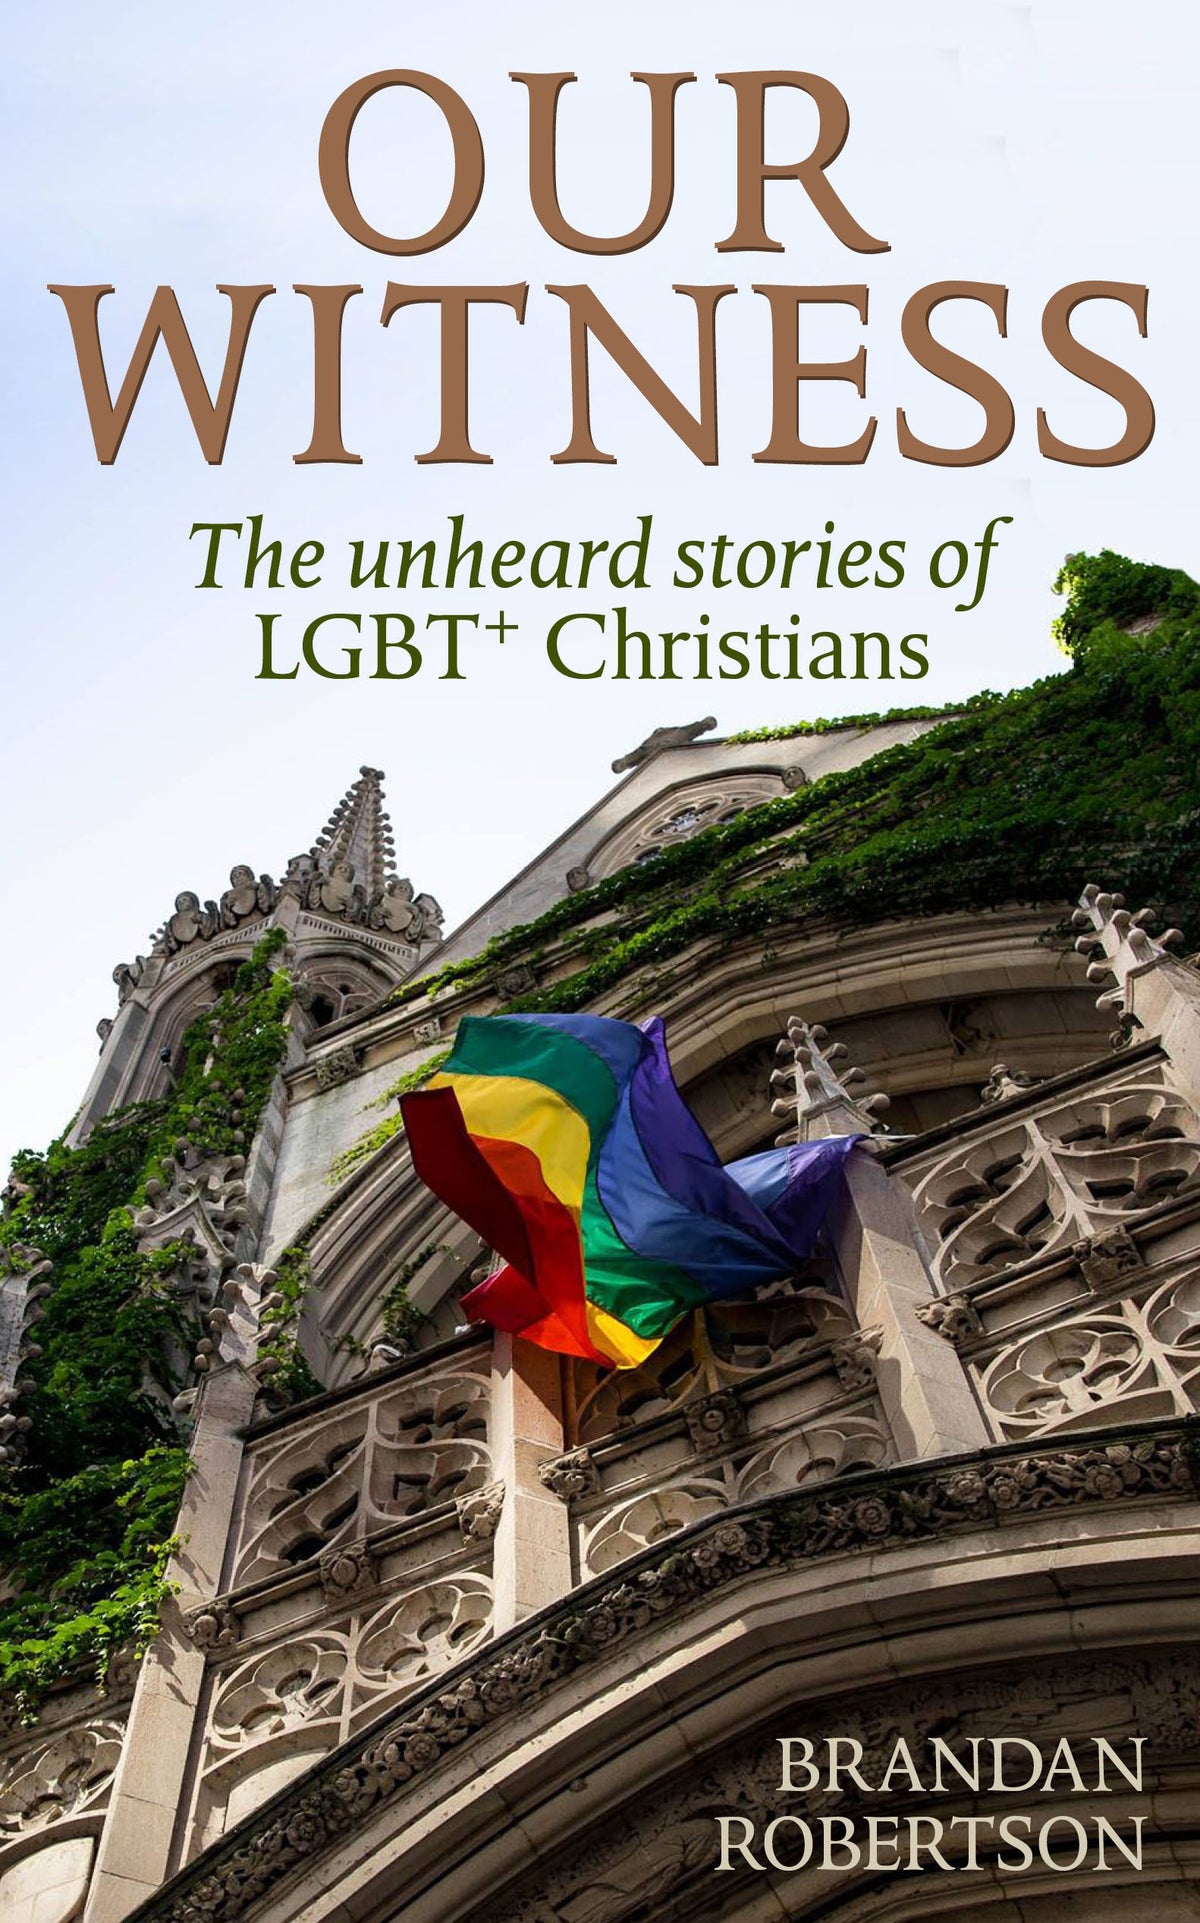 Our Witness : The unheard stories of LGBT+ Christians by Brandan Robertson